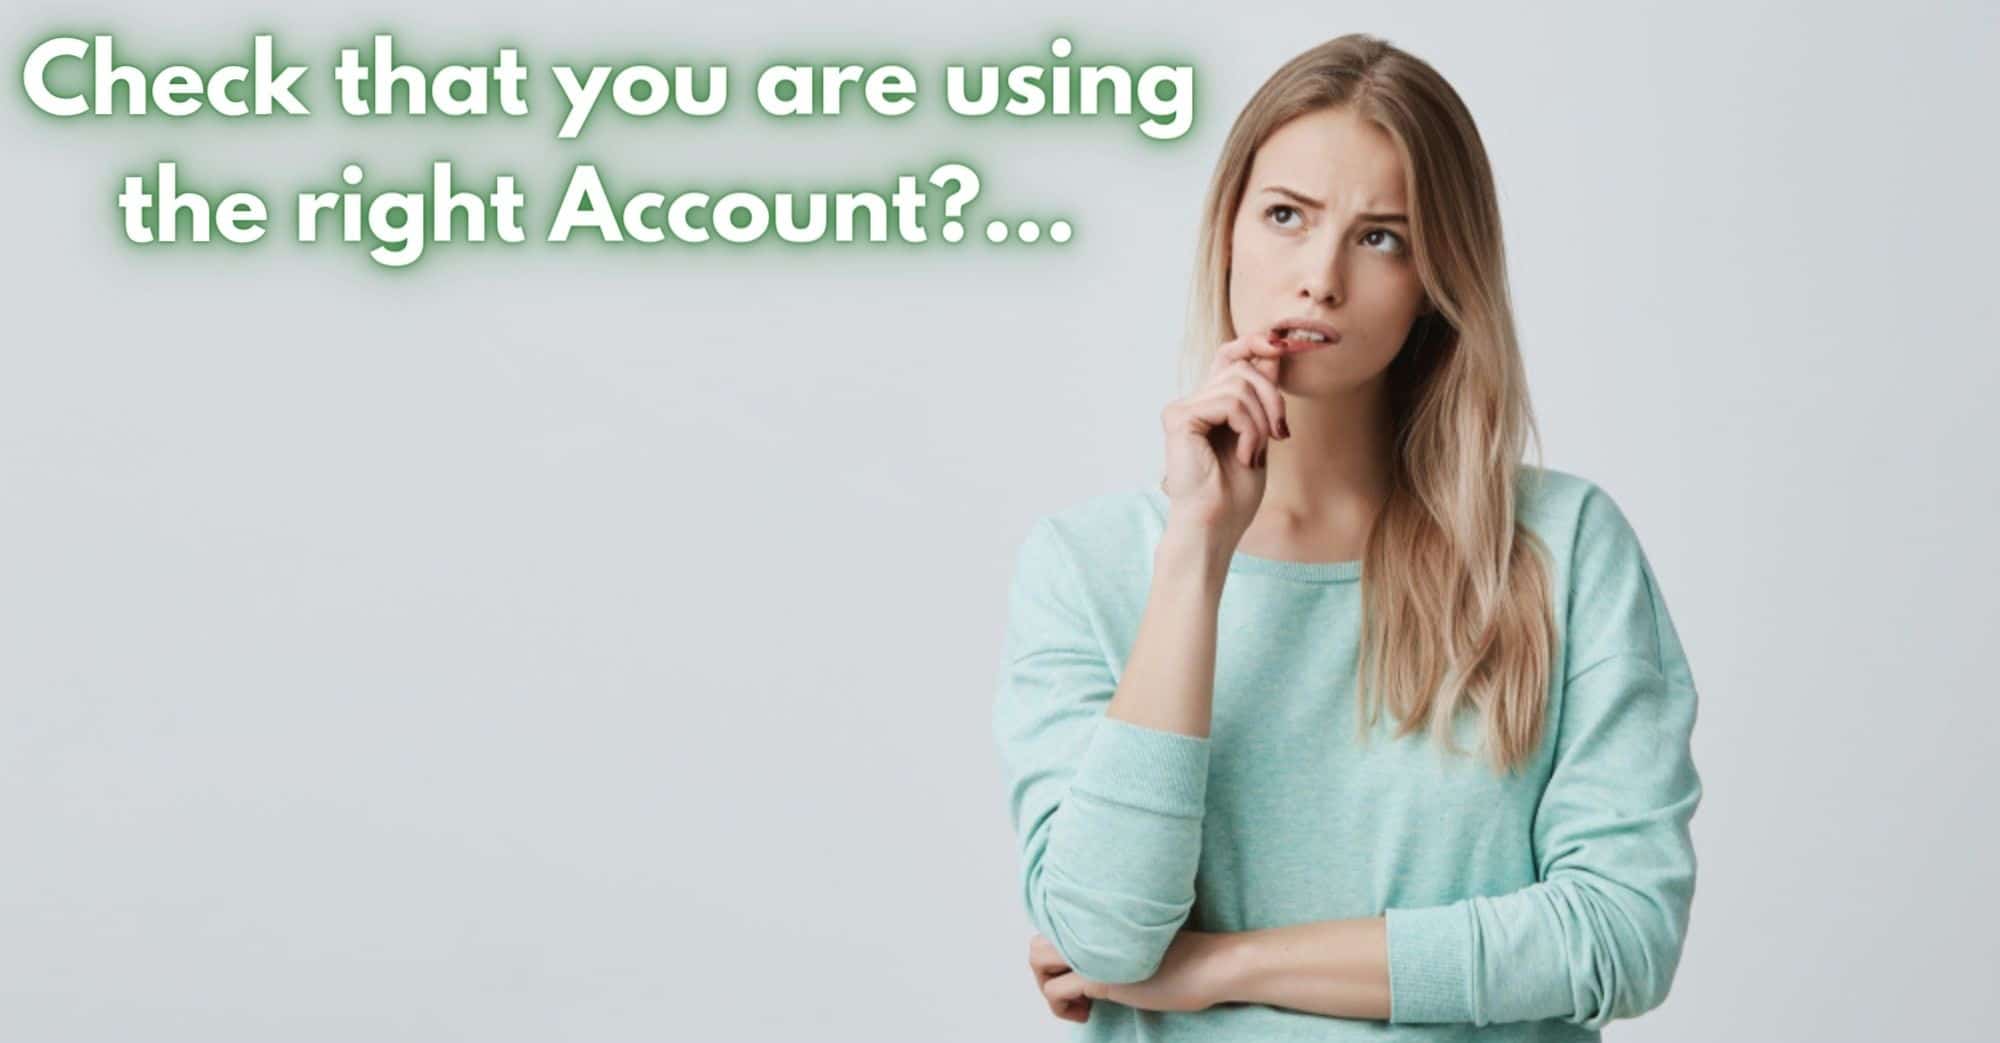 Check that you are using the right Account